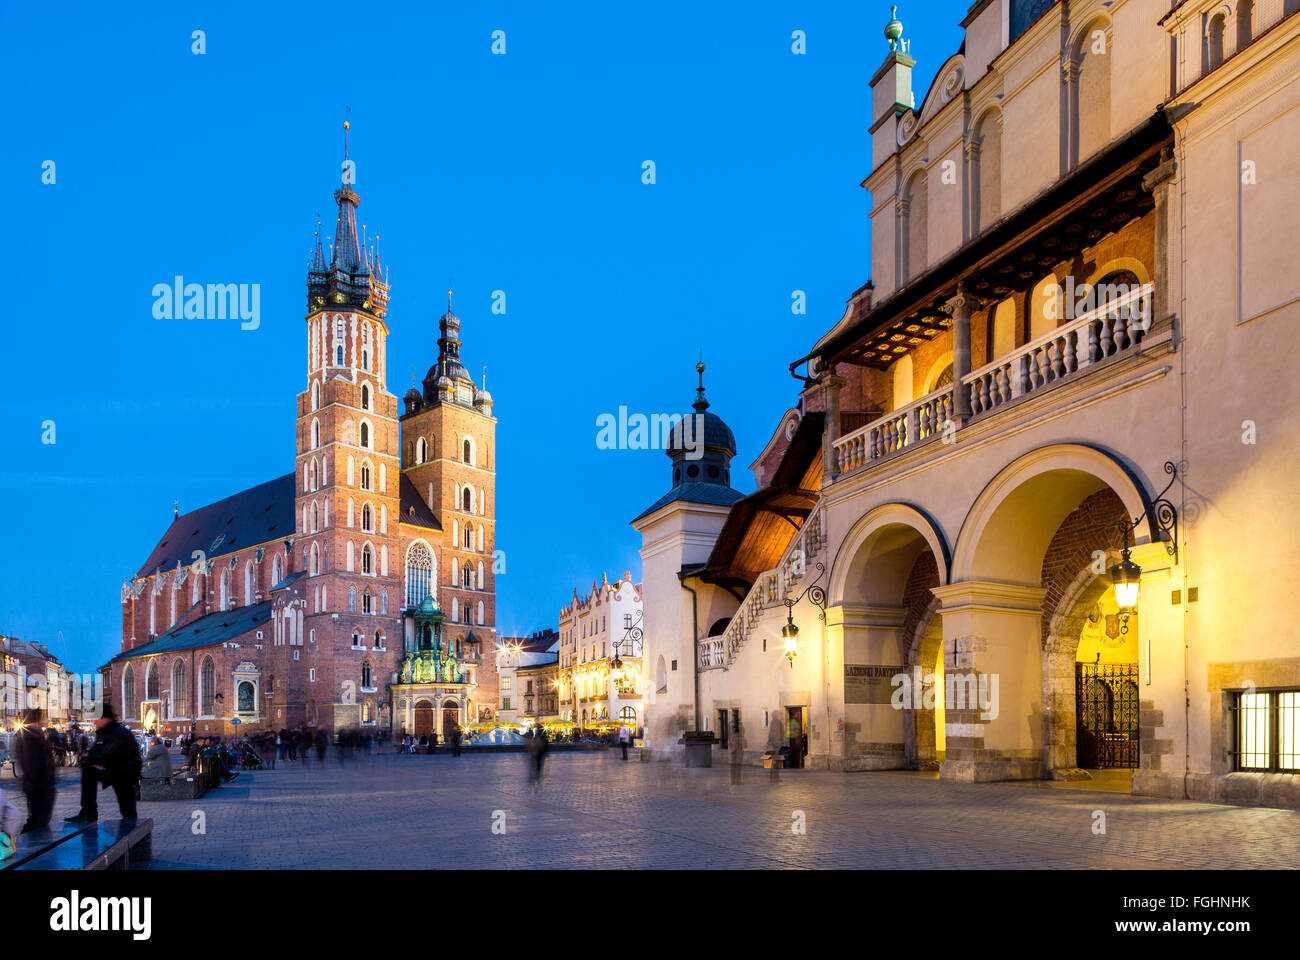 Krakow - Poland - April 22. Krakow - evening picture of old square in Krakow. People walking through the square. Highlighted Kra Stock Photo